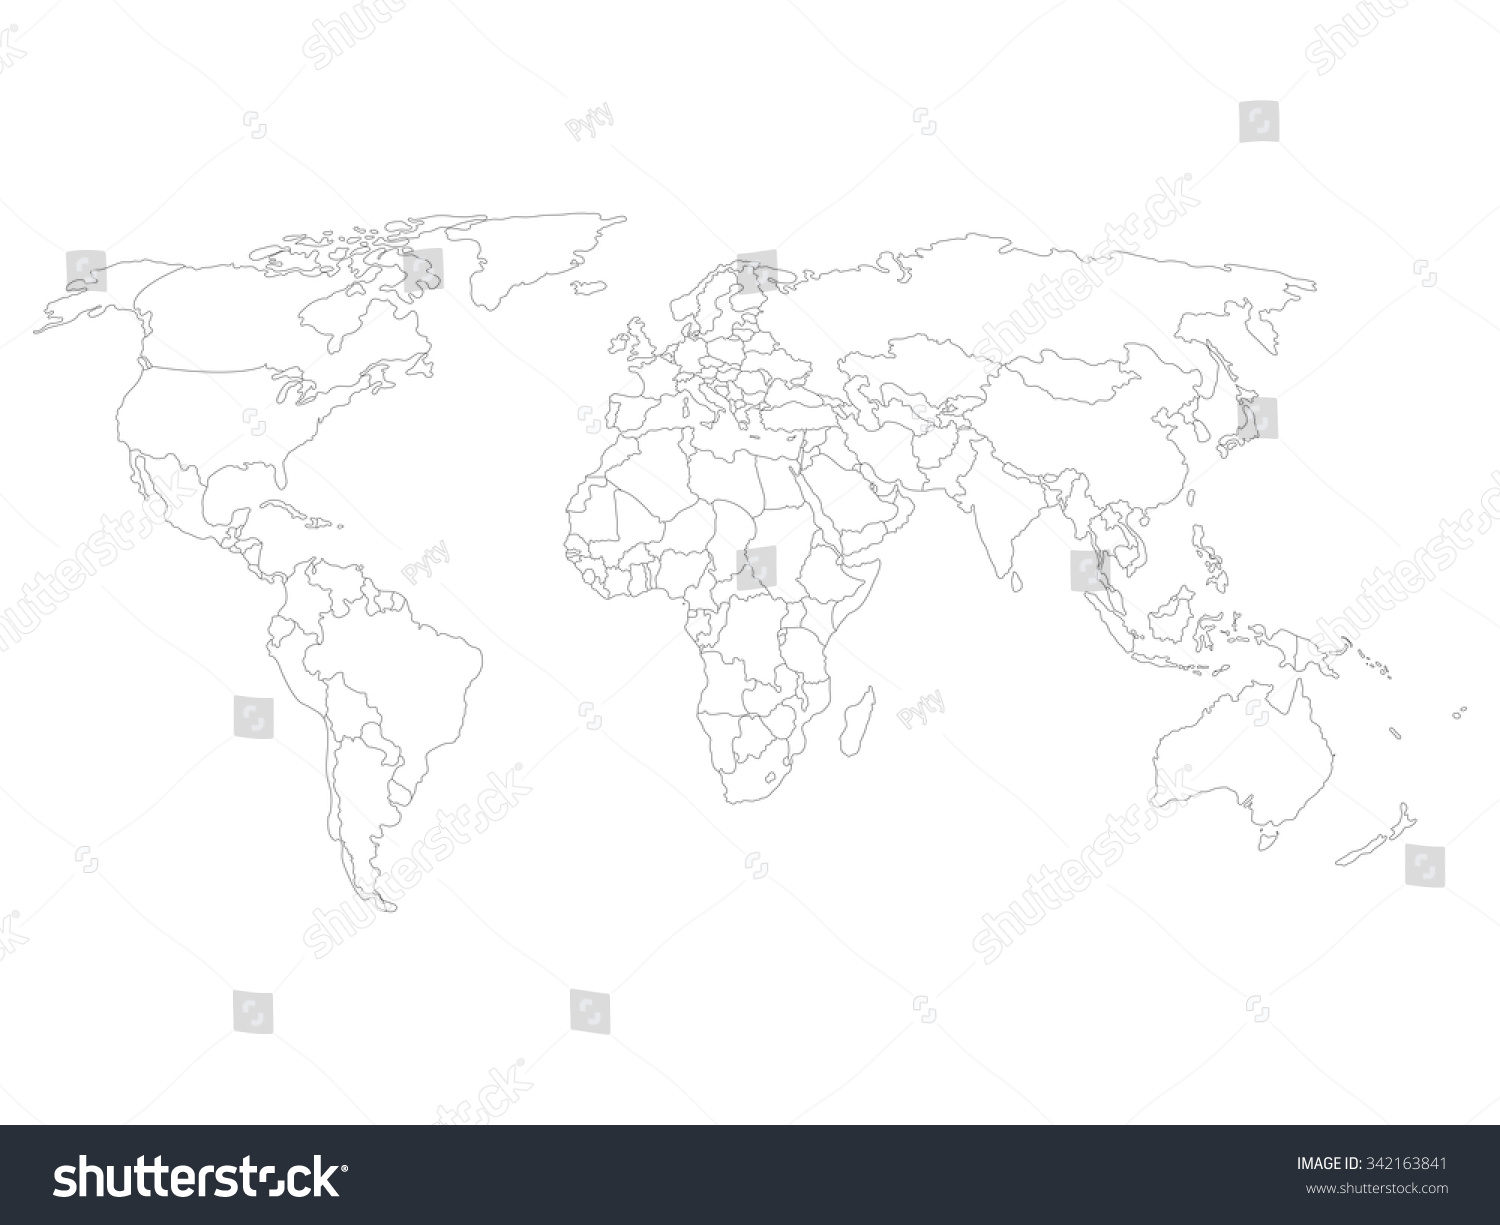 World map with smoothed country borders. Thin black outline on white background. #342163841